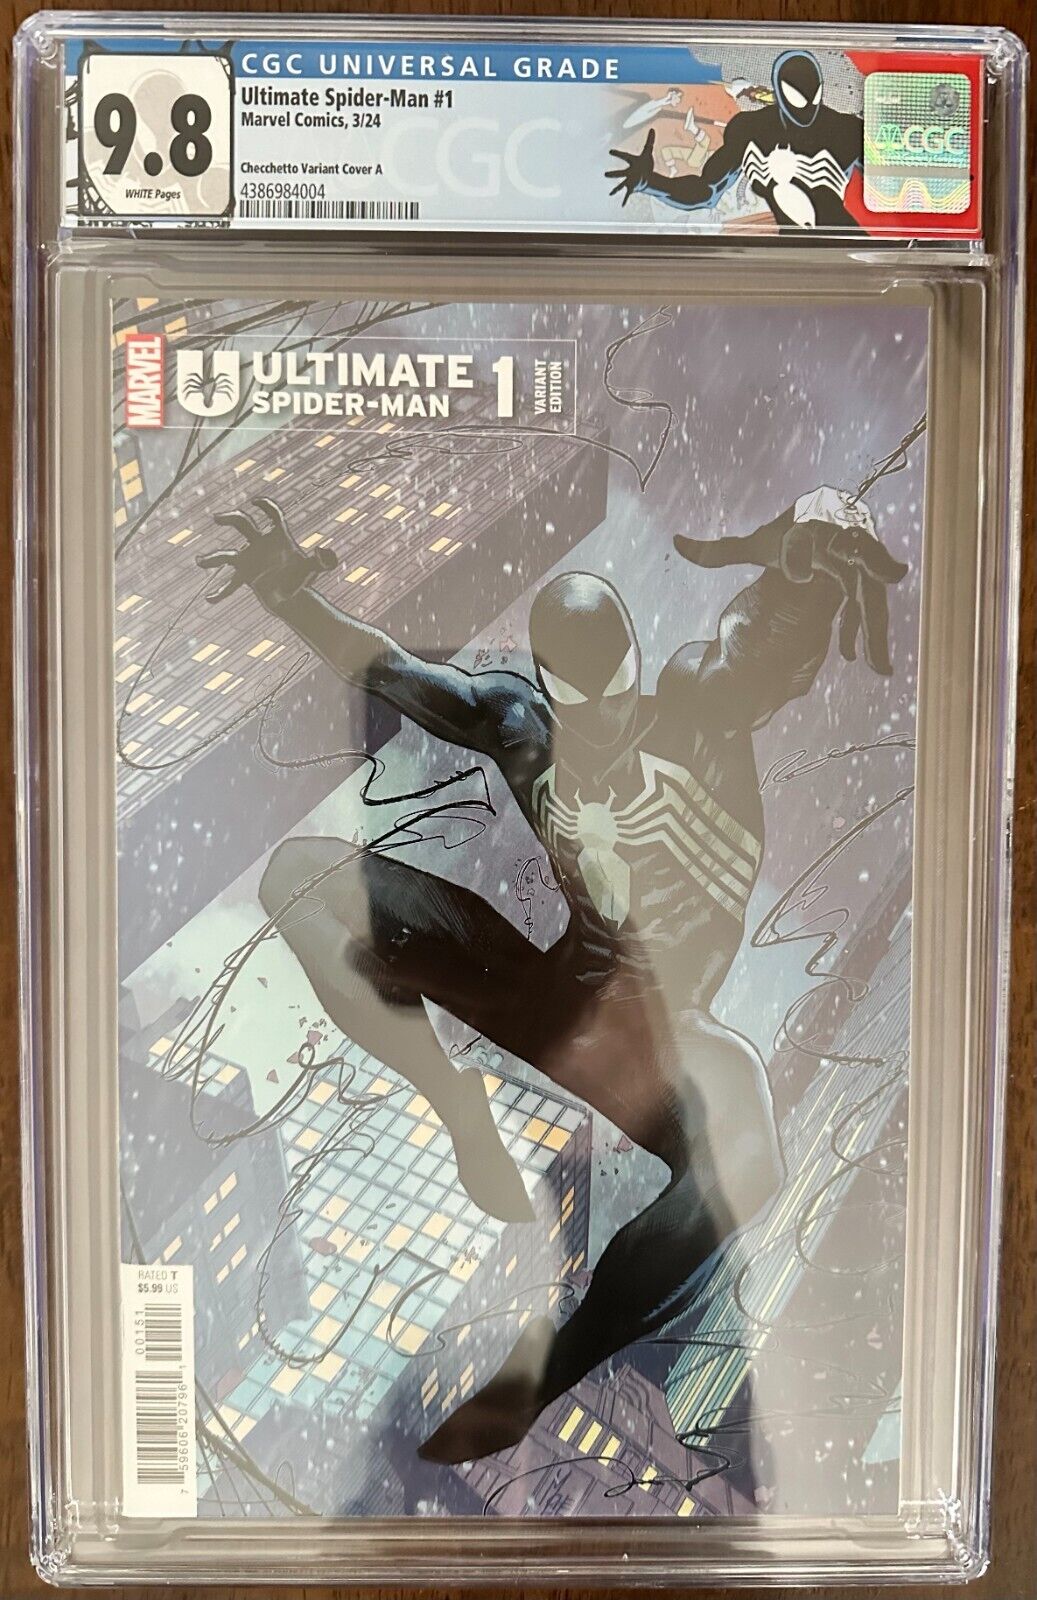 Ultimate Spider-Man #1 CGC 9.8 Black Costume Variant cover A